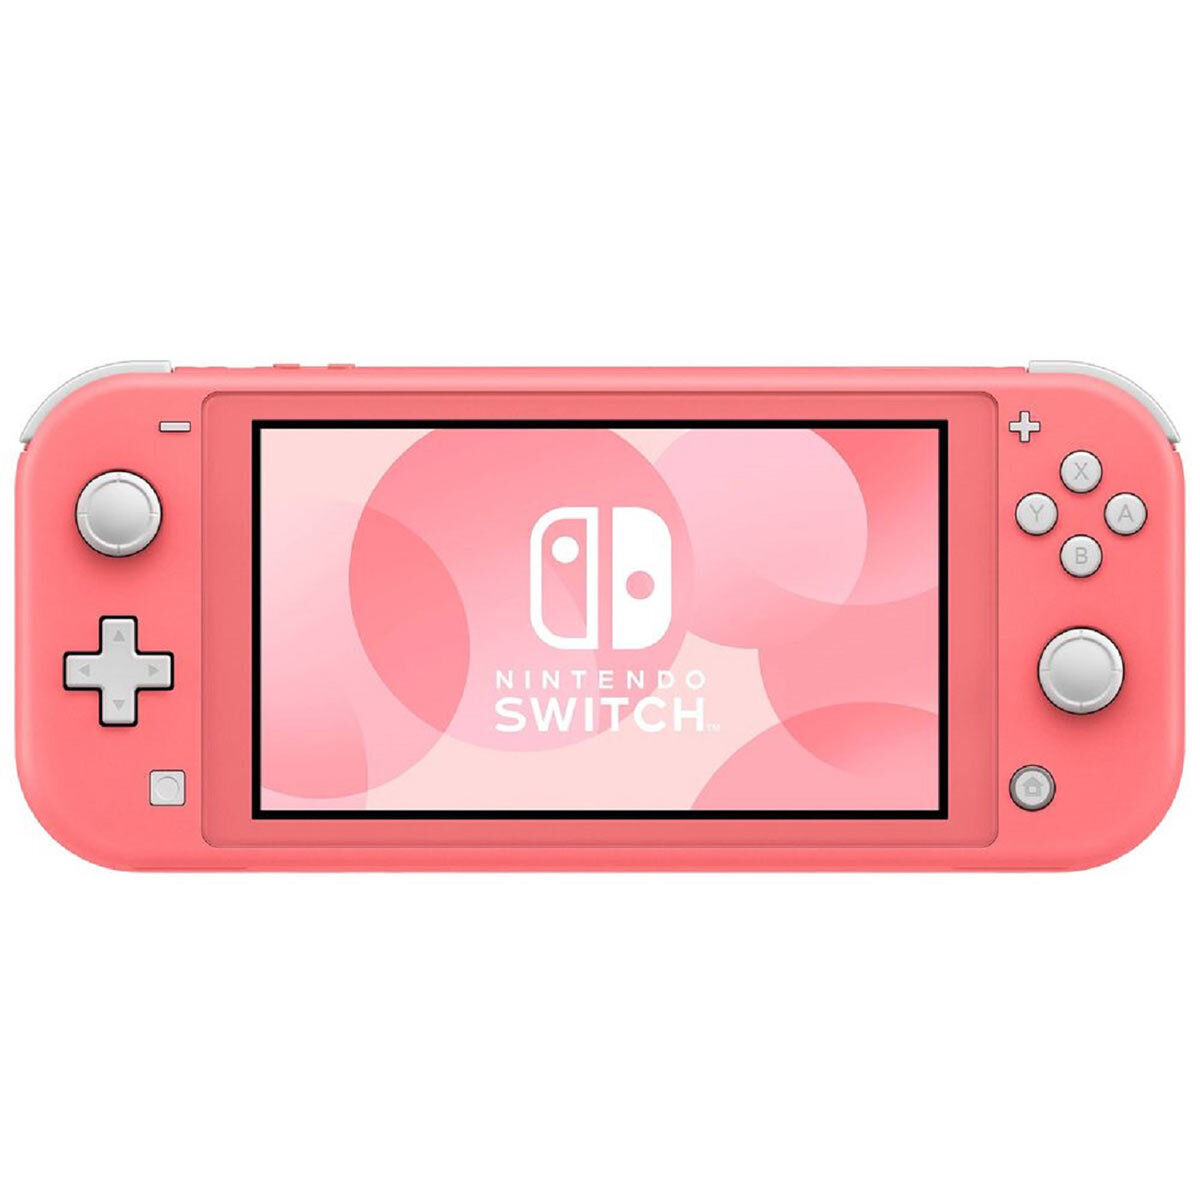 can you play online with a nintendo switch lite